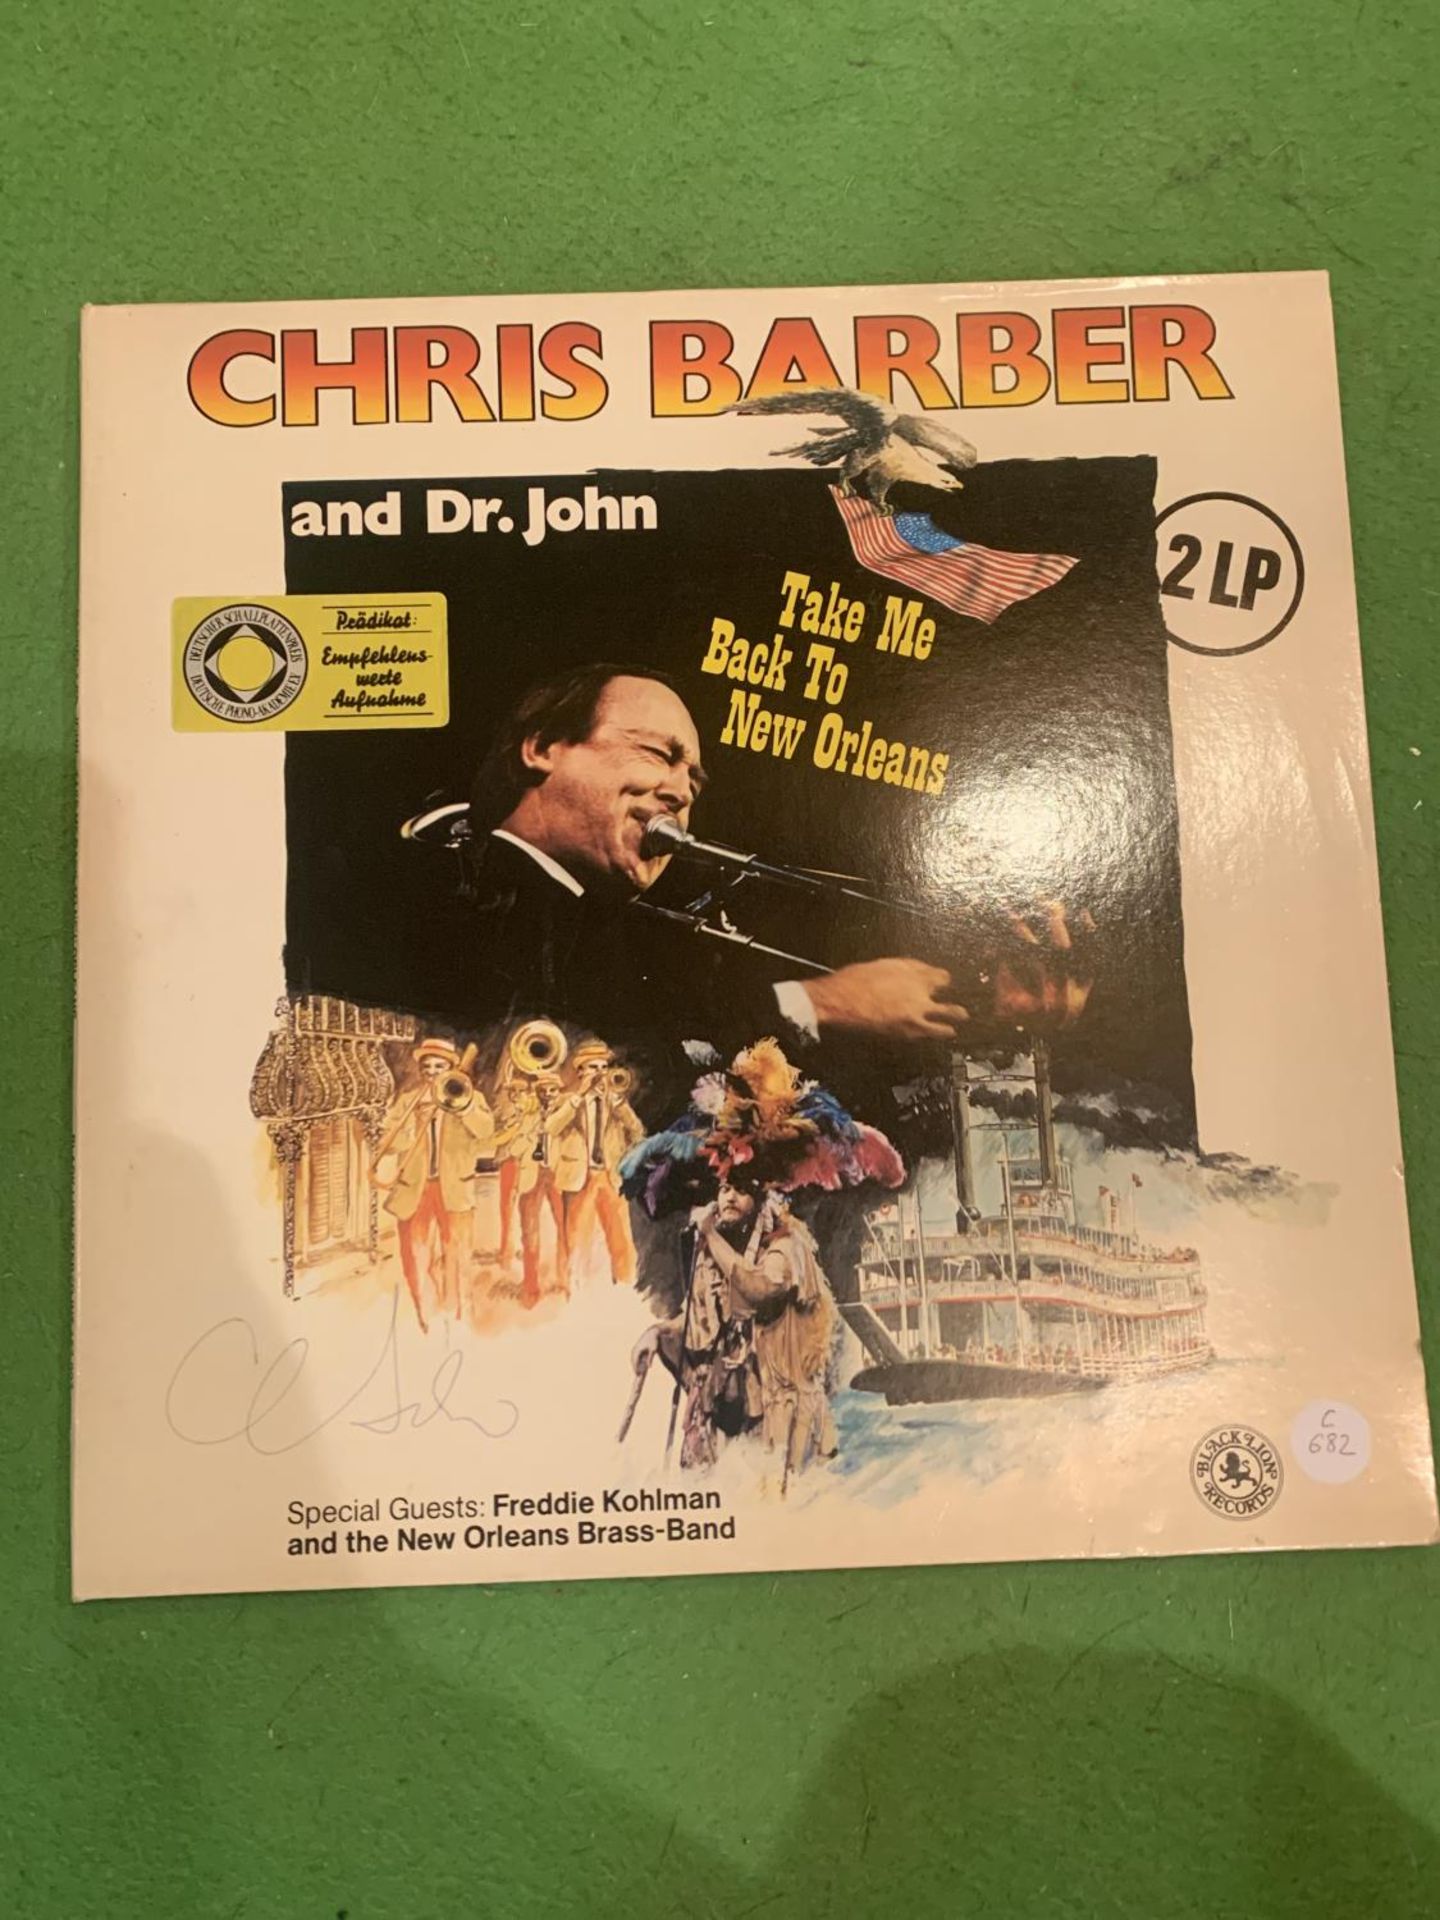 A CHRIS BARBER AND DR JOHN TAKE ME BACK TO NEW ORLEANS TWO LP SLEEVE SIGNED FRONT AND BACK BY DR